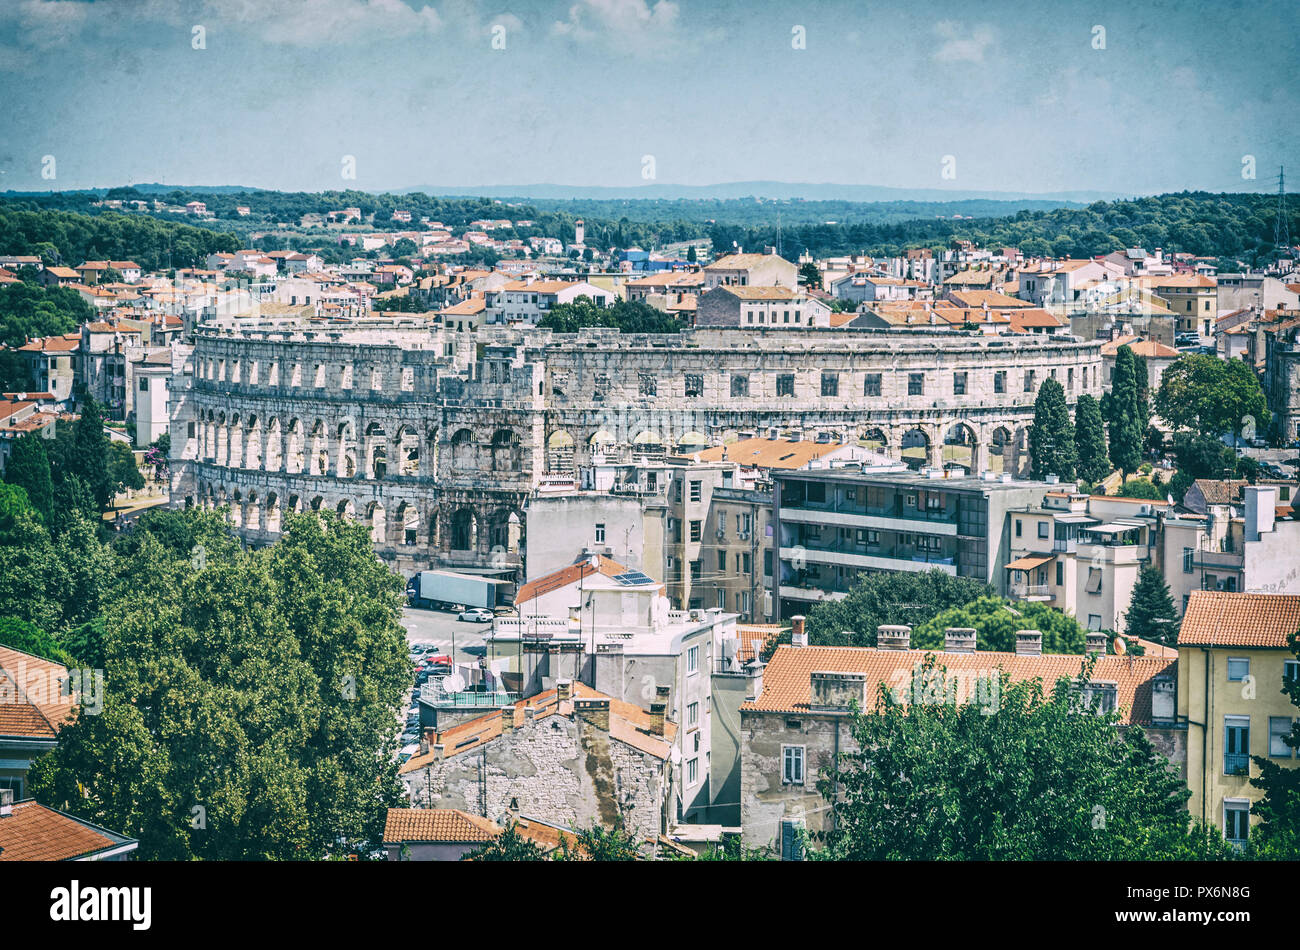 Pula Arena - ancient amphitheater located in Pula, Istria, Croatia. Travel destination. Famous object. Analog photo filter with scratches. Stock Photo